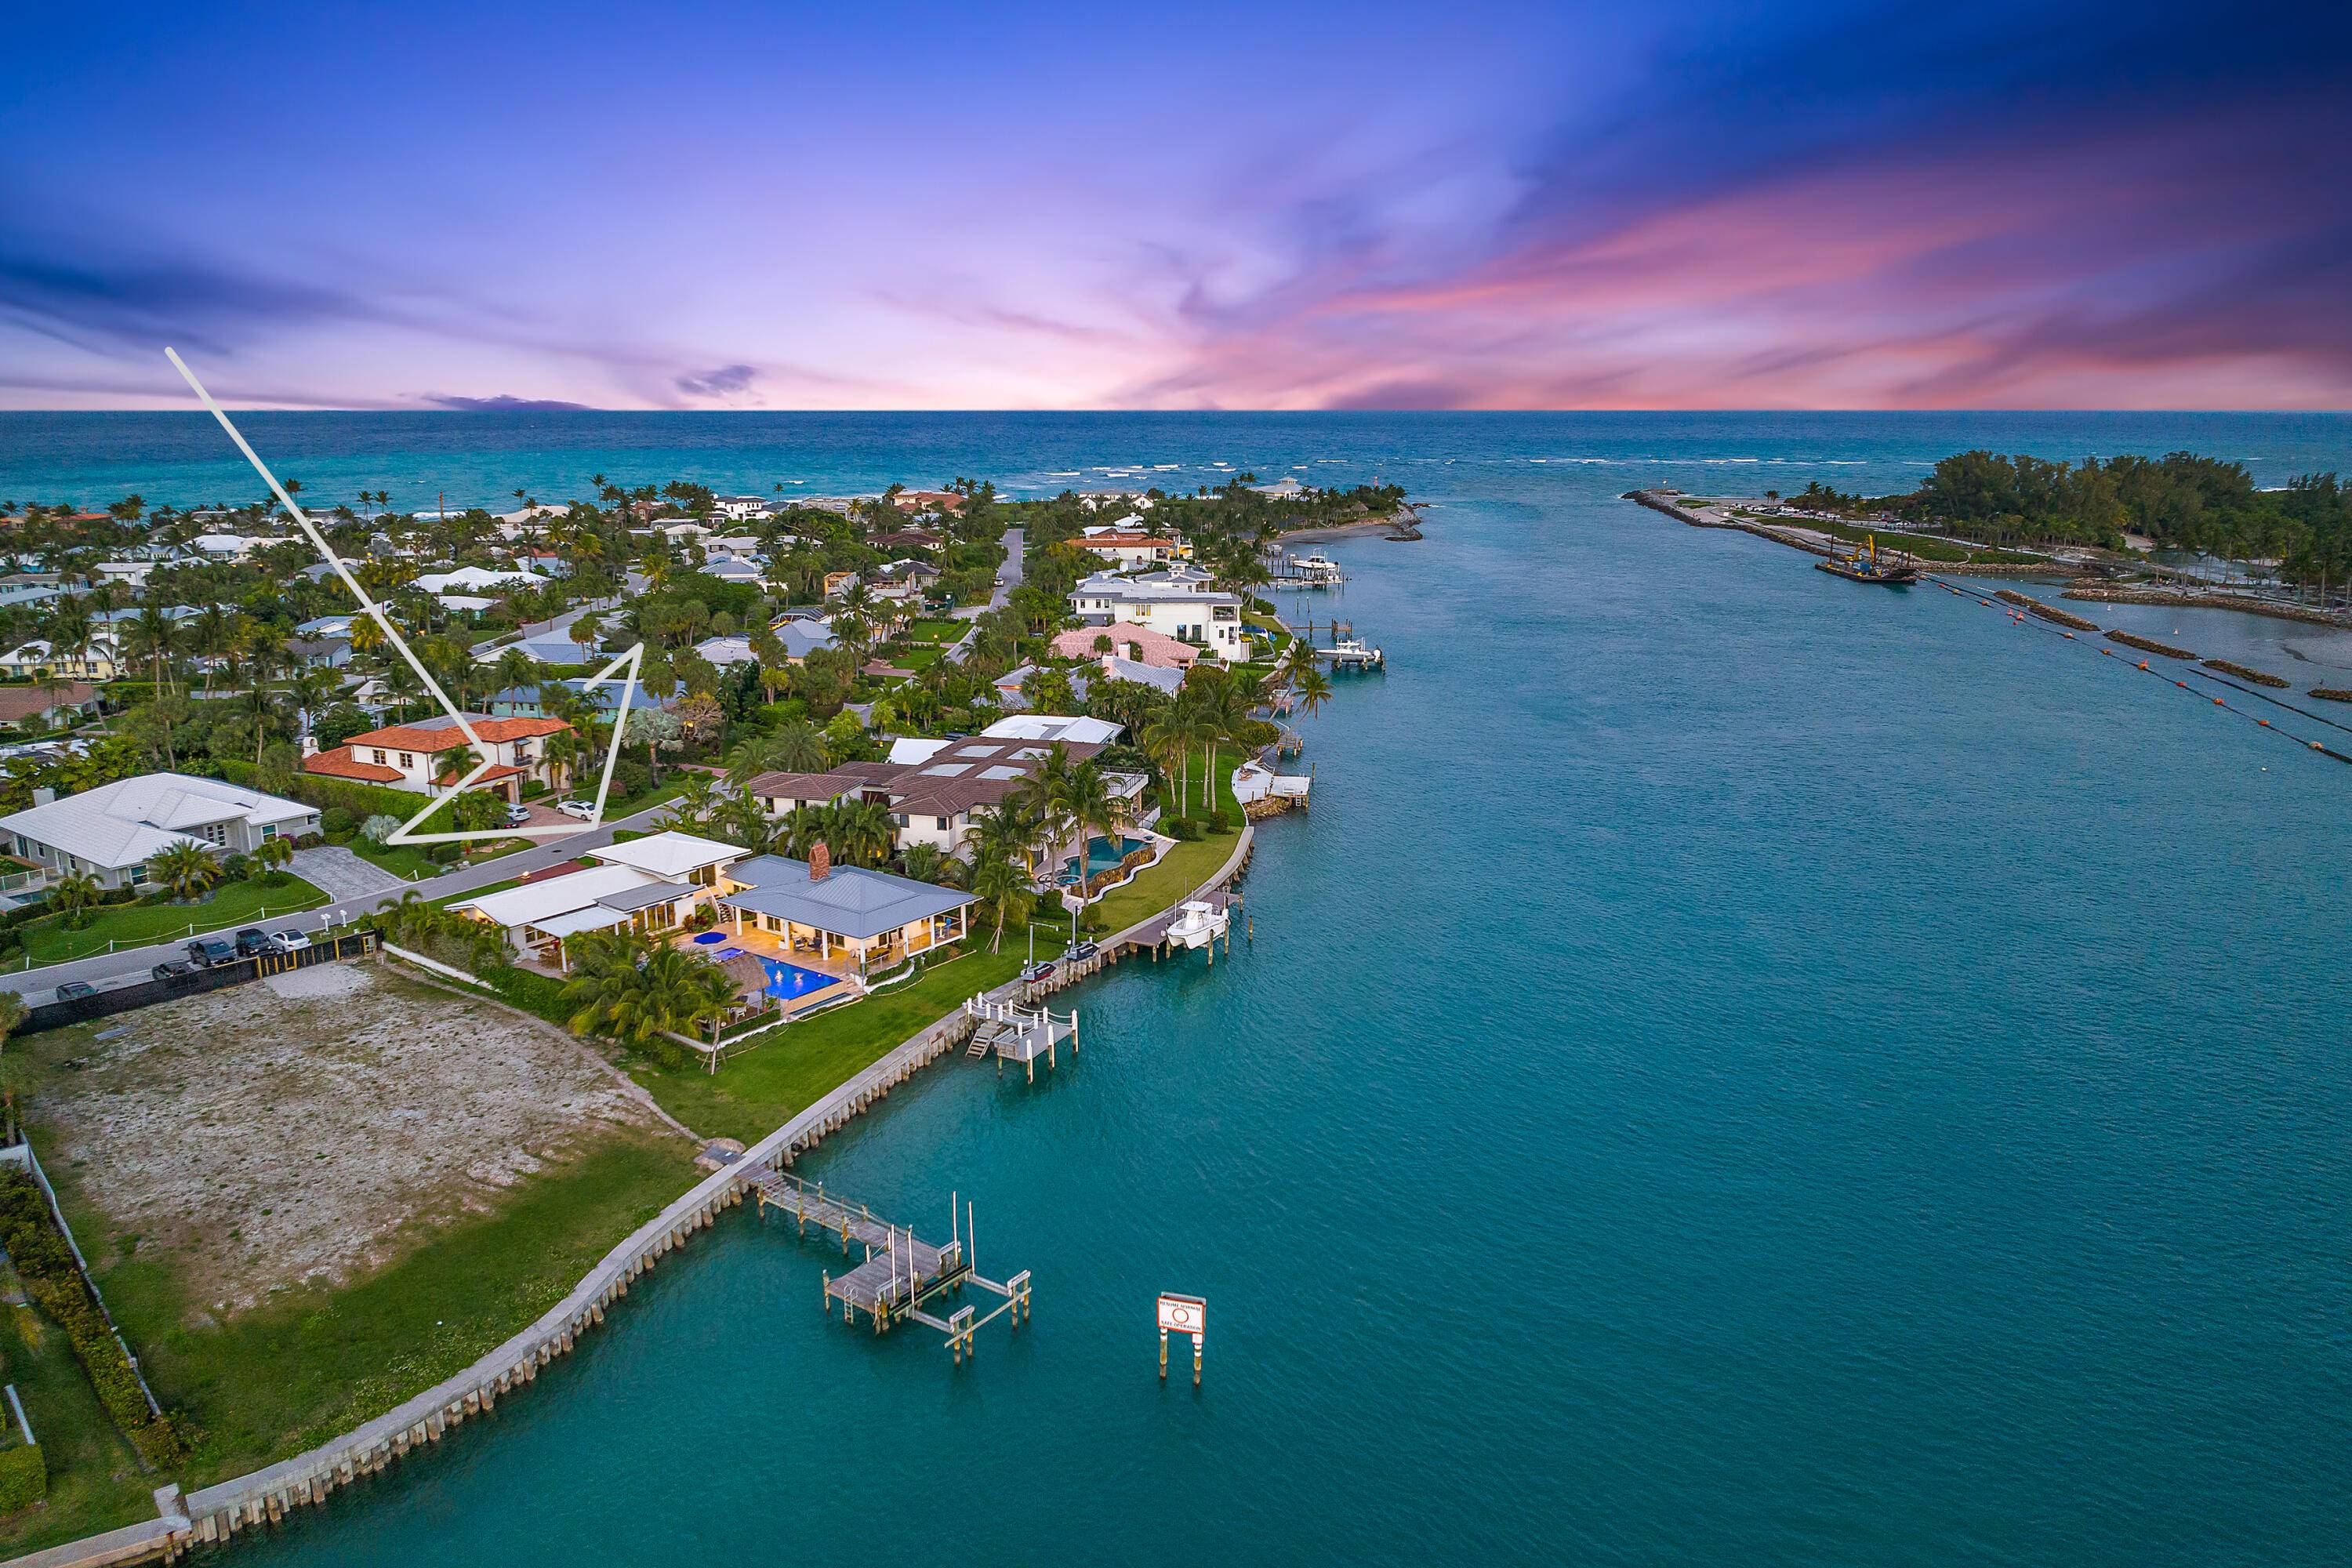 Extremely rare opportunity to own or design build your dream home on the southern tip of Jupiter Island in this exclusive enclave of the beach front town of Jupiter Inlet ...